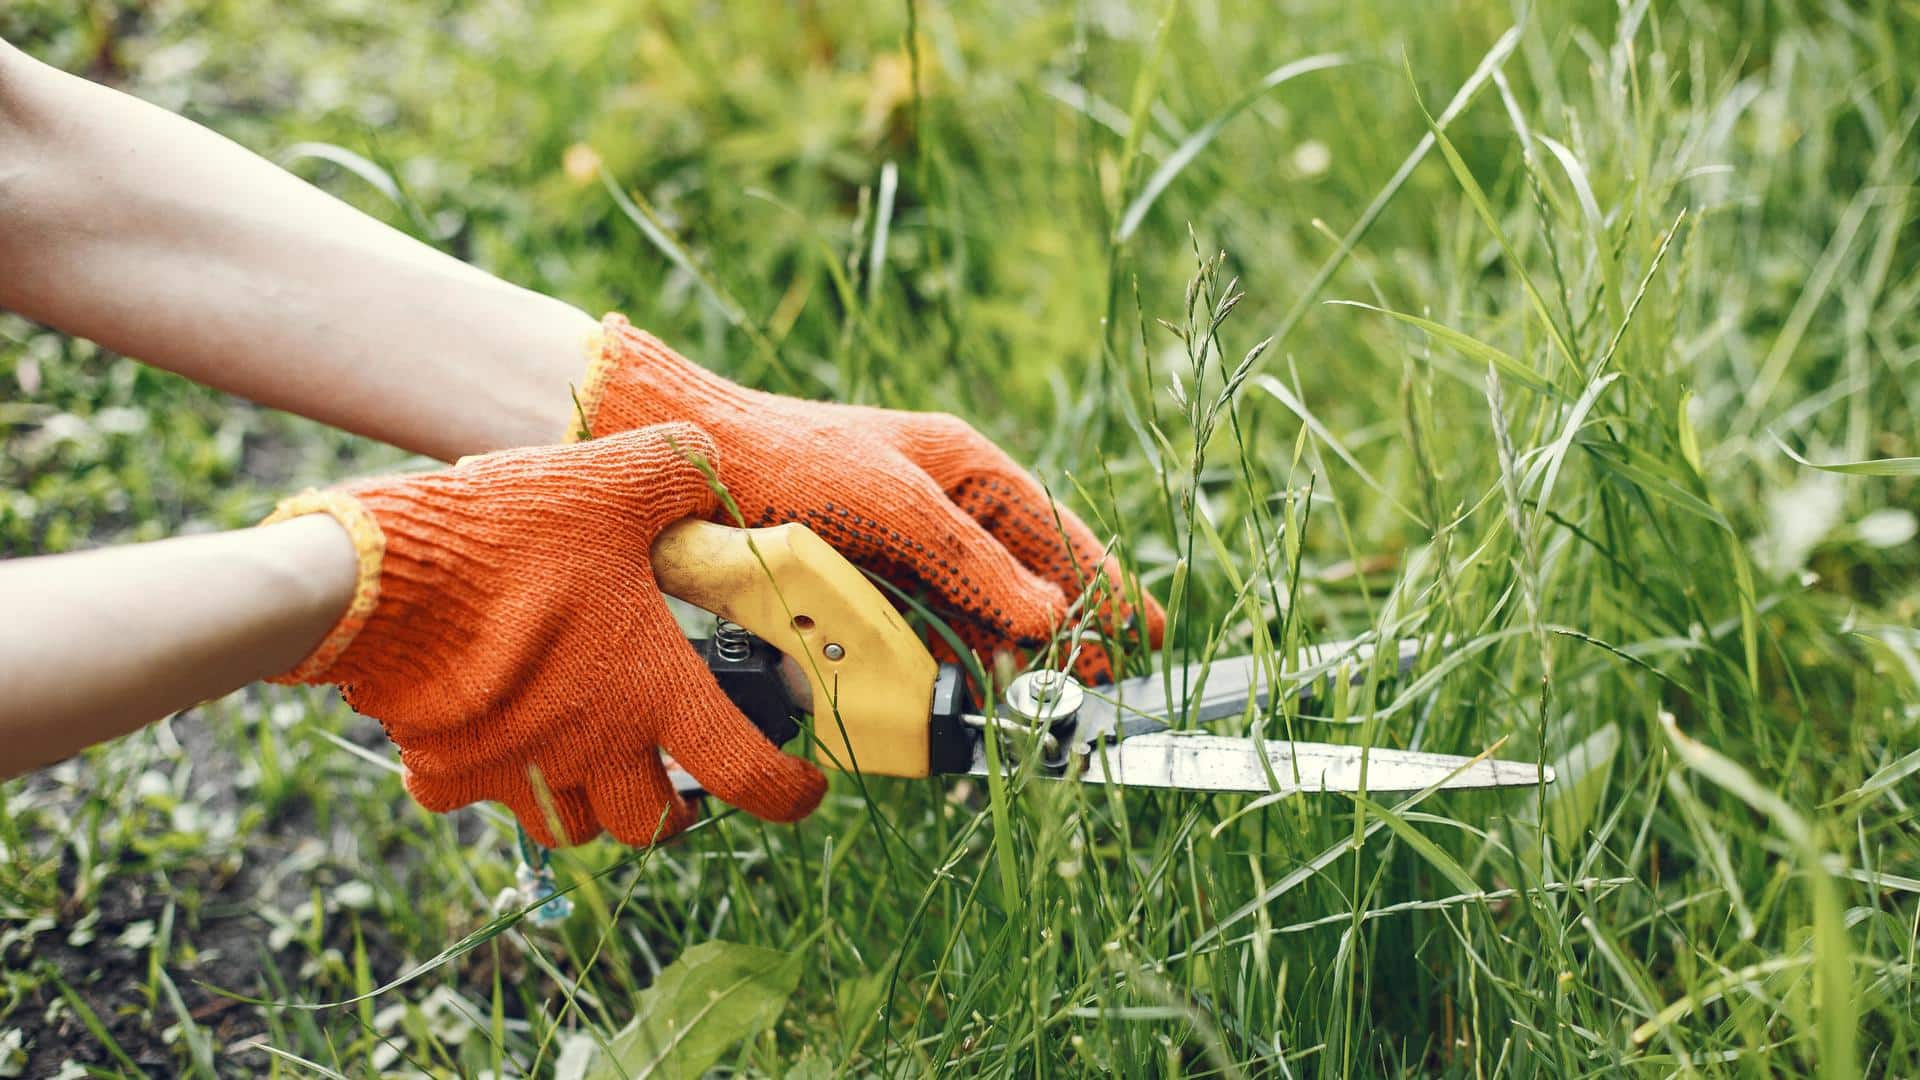 Five natural ways to remove weeds from your garden